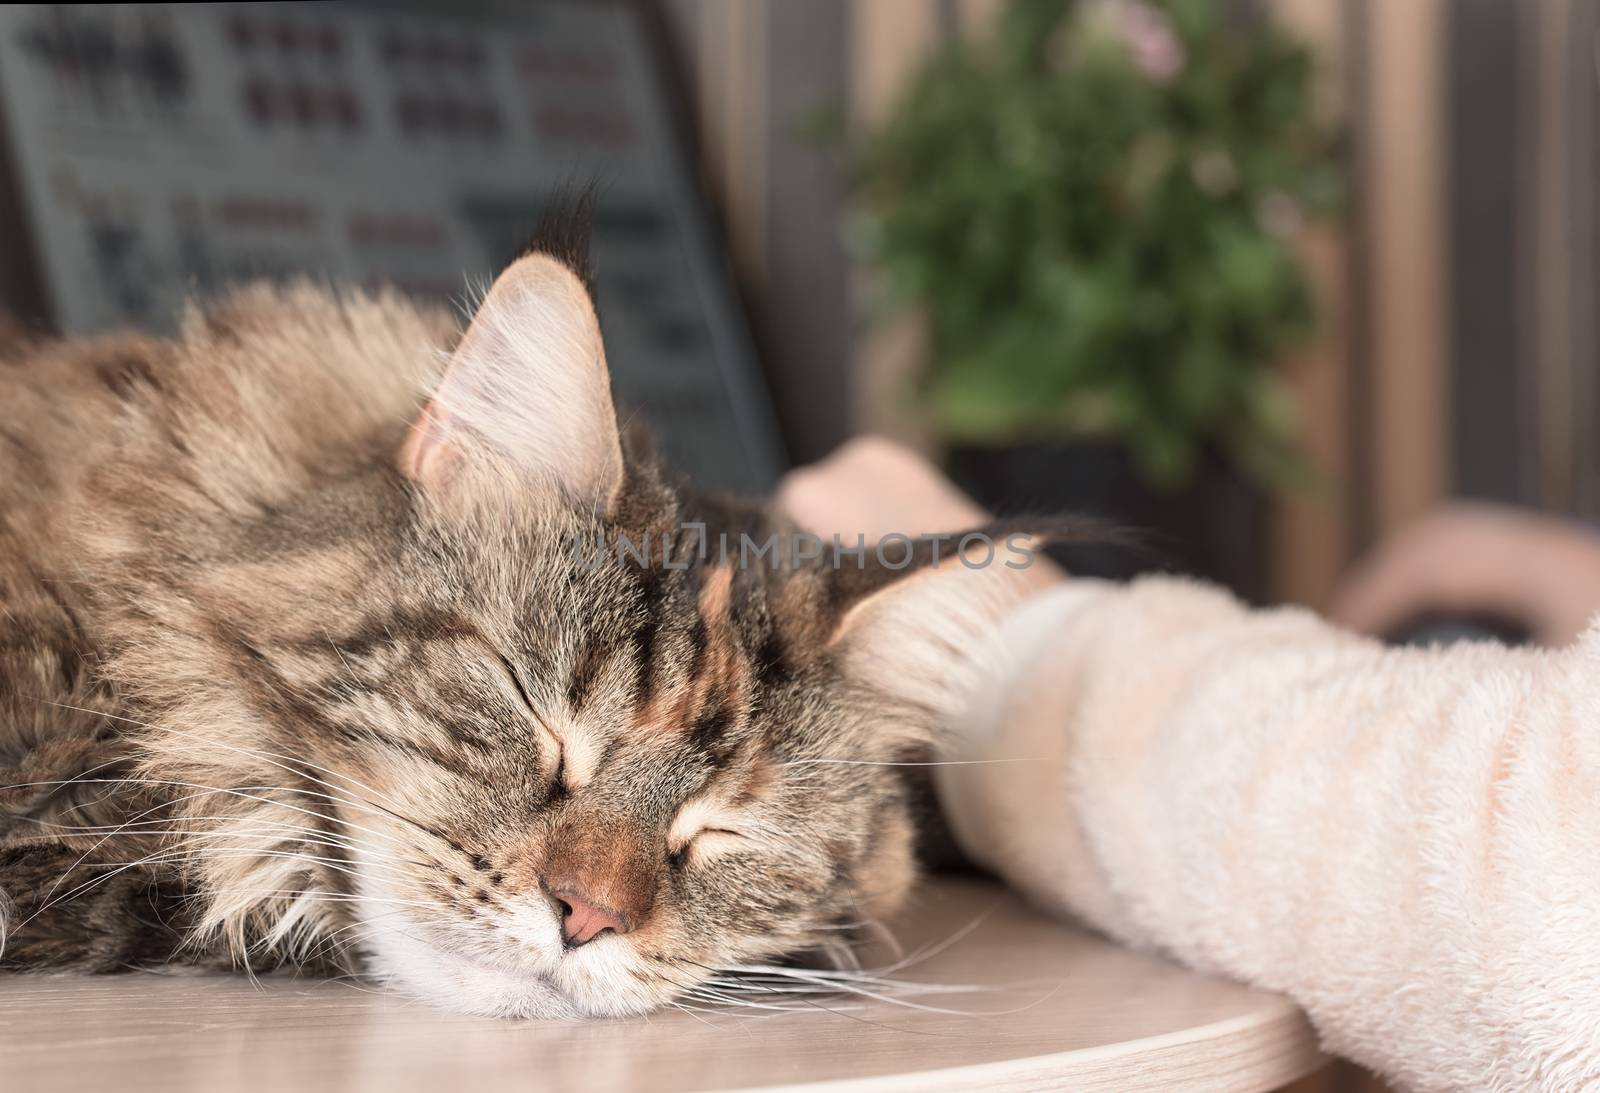 Cat sleeps on the table by Visual-Content